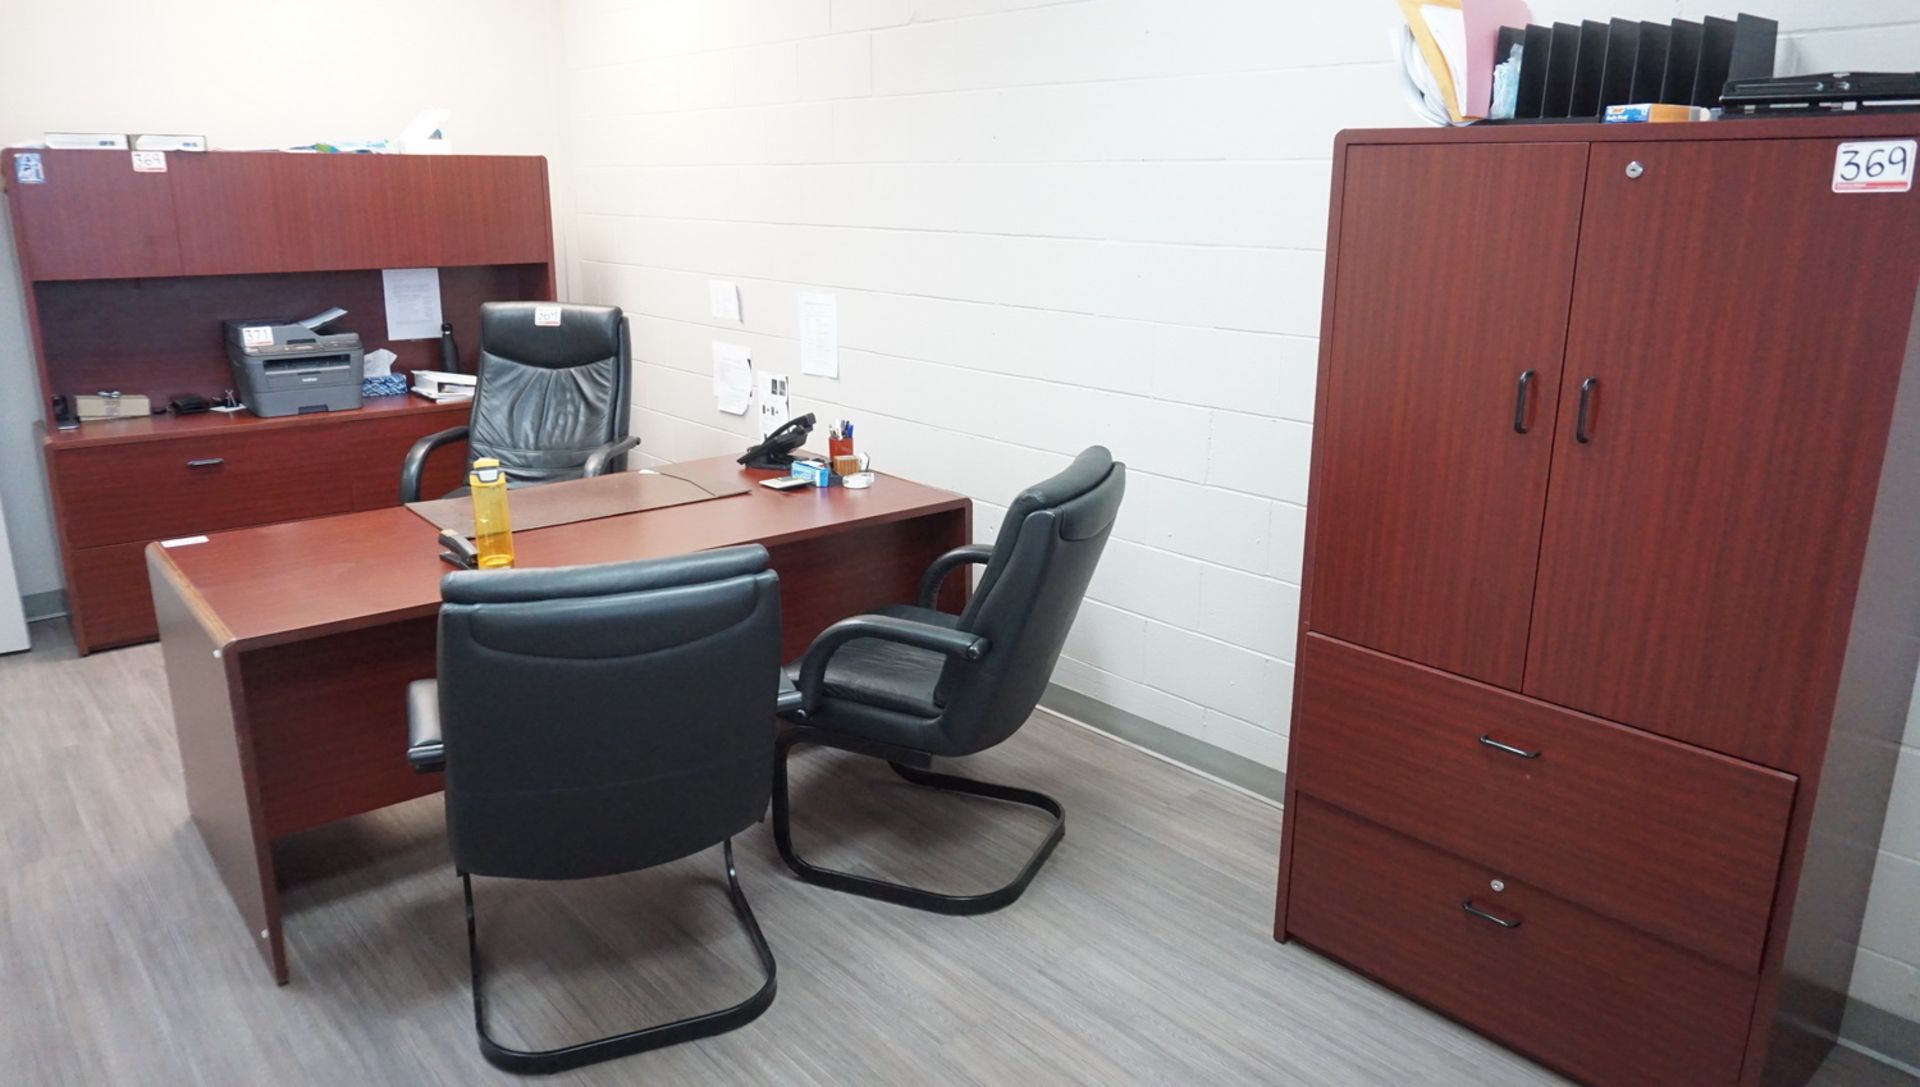 LOT - EXECUTIVE OFFICE SUITE W/ DESK, CREDENZA, HUTCH, SUPPLY CABINET, (2) GUEST CHAIRS, (1)